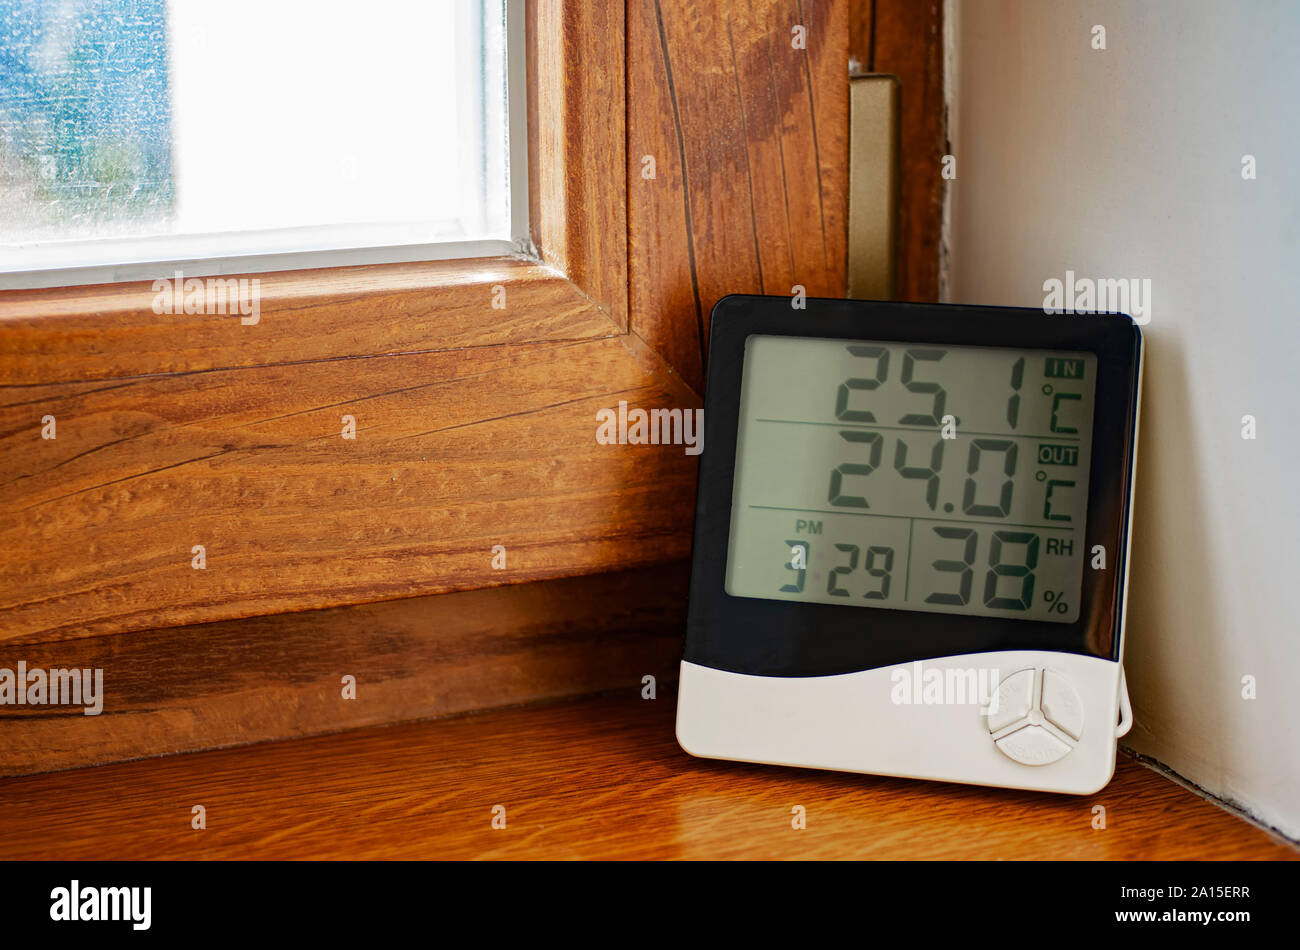 Home weather station. Digital indoor temperature and humidity